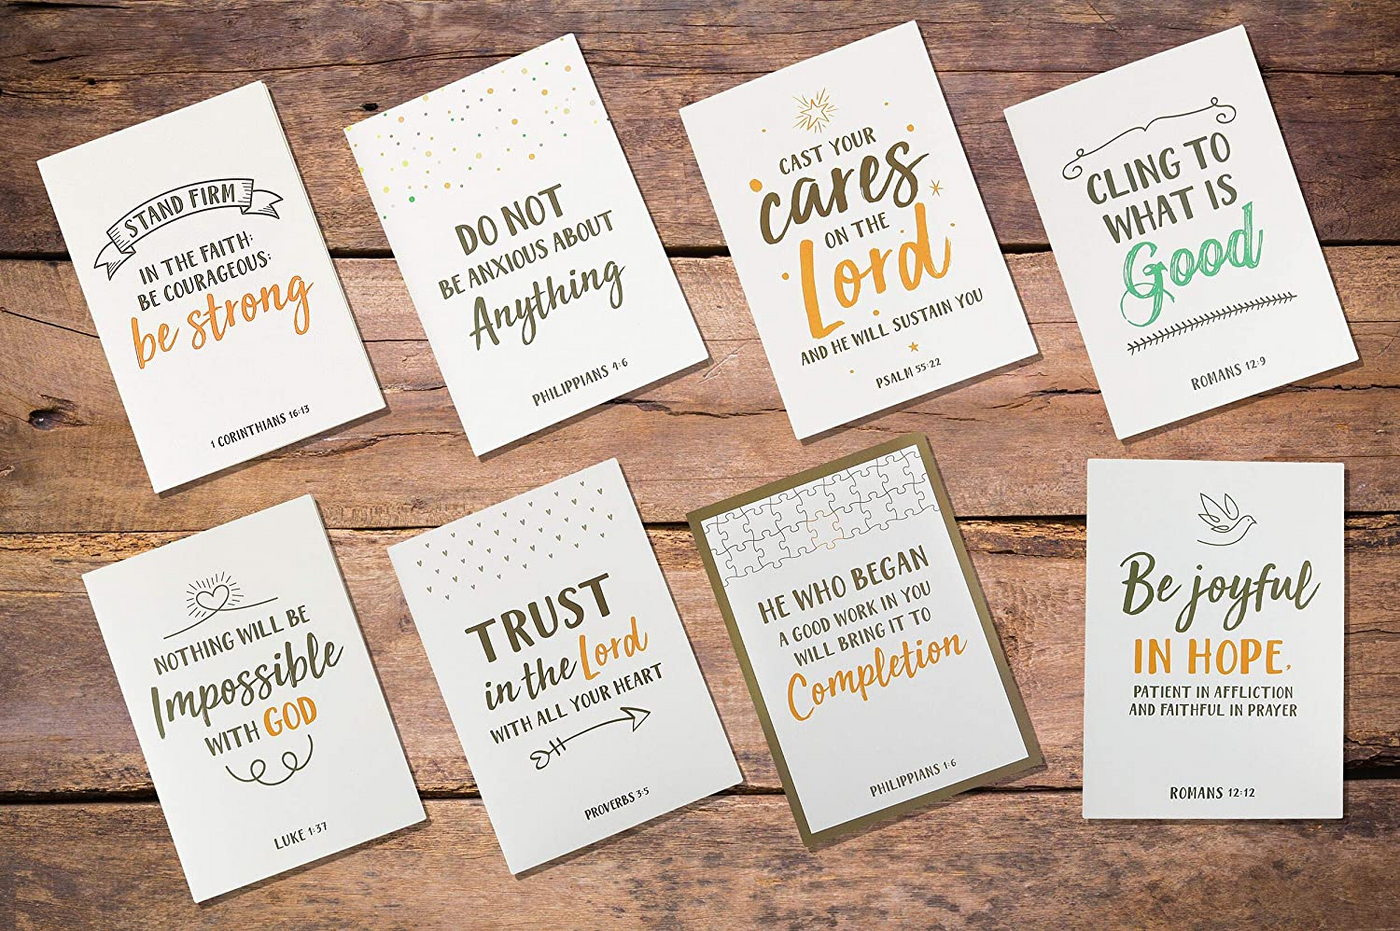 Dessie 56 Pack Inspirational Bible Verse Cards with Envelopes